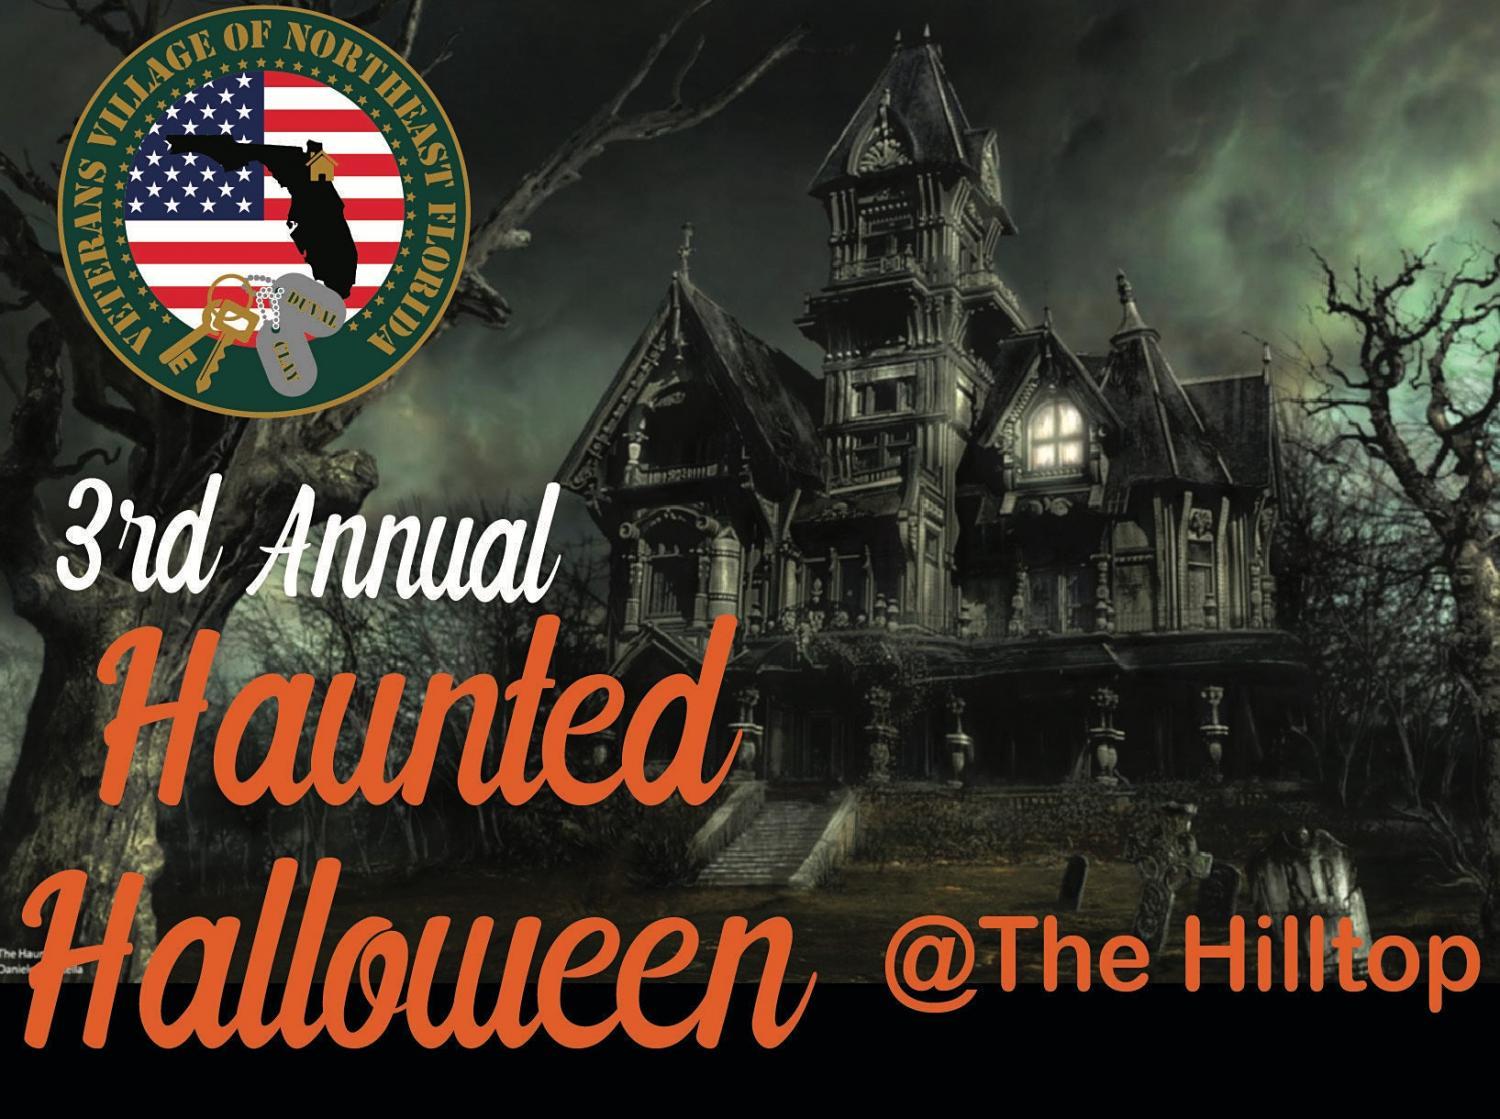 3rd Annual Haunted Halloween at The Hilltop
Fri Oct 28, 7:00 PM - Fri Oct 28, 11:00 PM
in 8 days